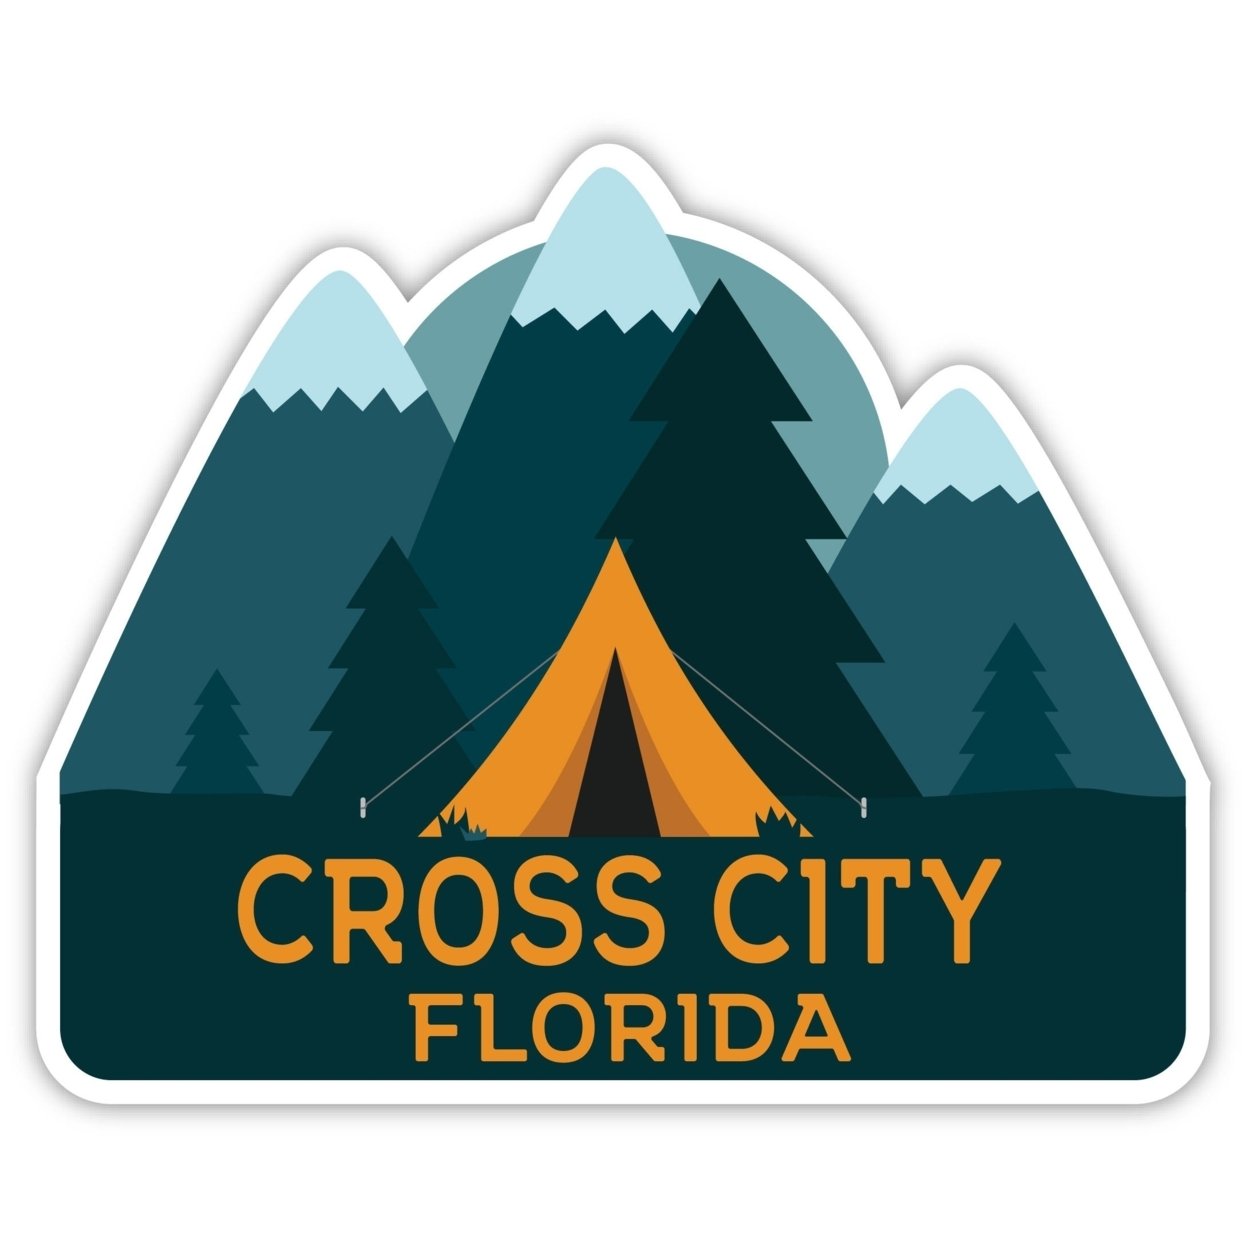 Cross City Florida Souvenir Decorative Stickers (Choose Theme And Size) - 4-Pack, 2-Inch, Tent